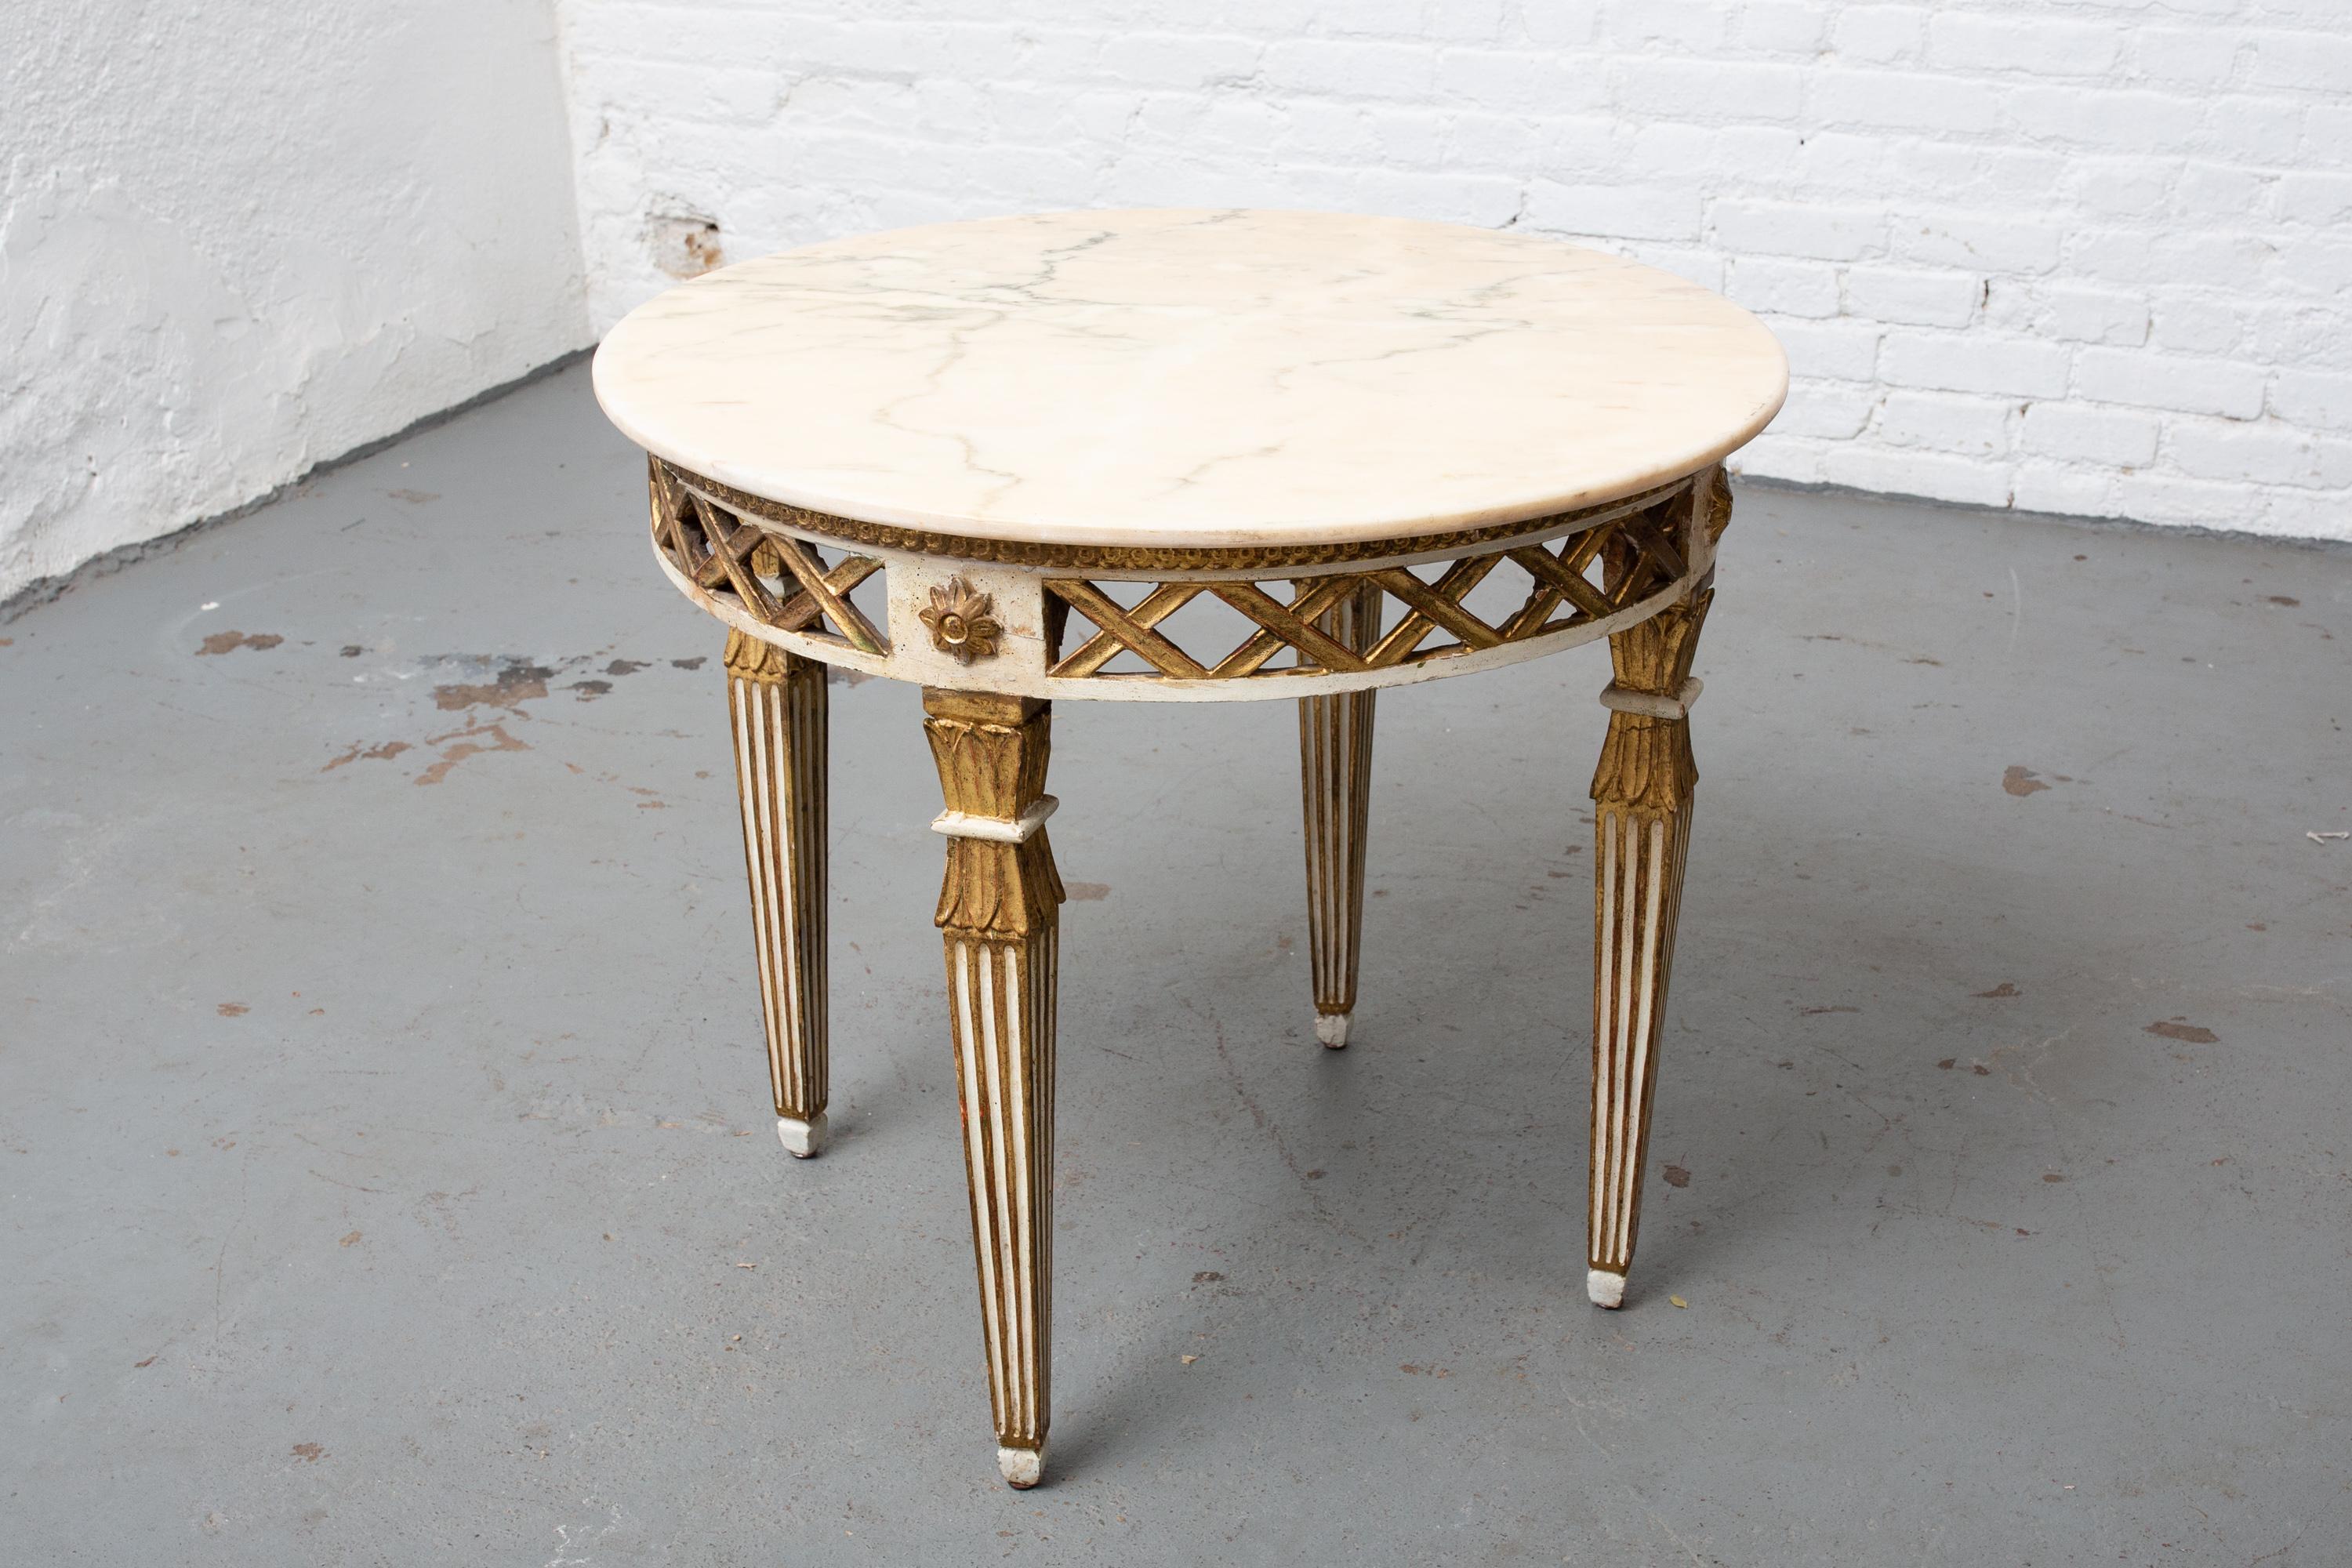 1930s Italian parcel gilt carved wood side table with marble top and fluted and tapered legs. Wood is well patinated. Sturdy.